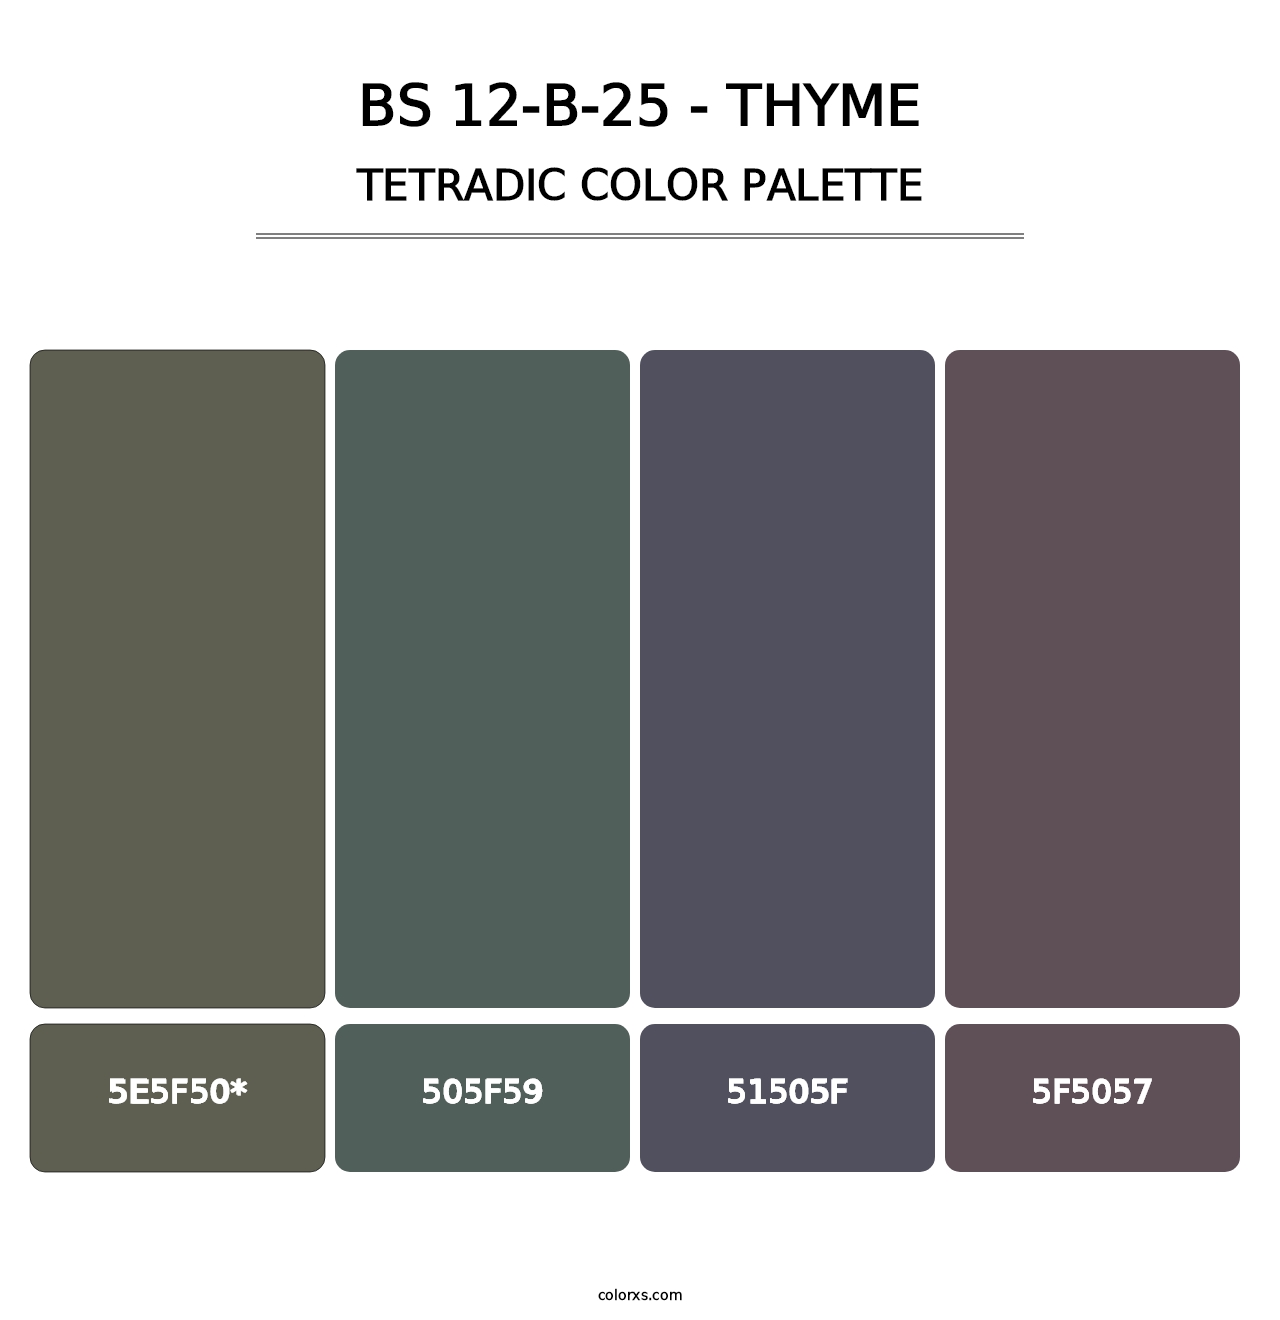 BS 12-B-25 - Thyme - Tetradic Color Palette